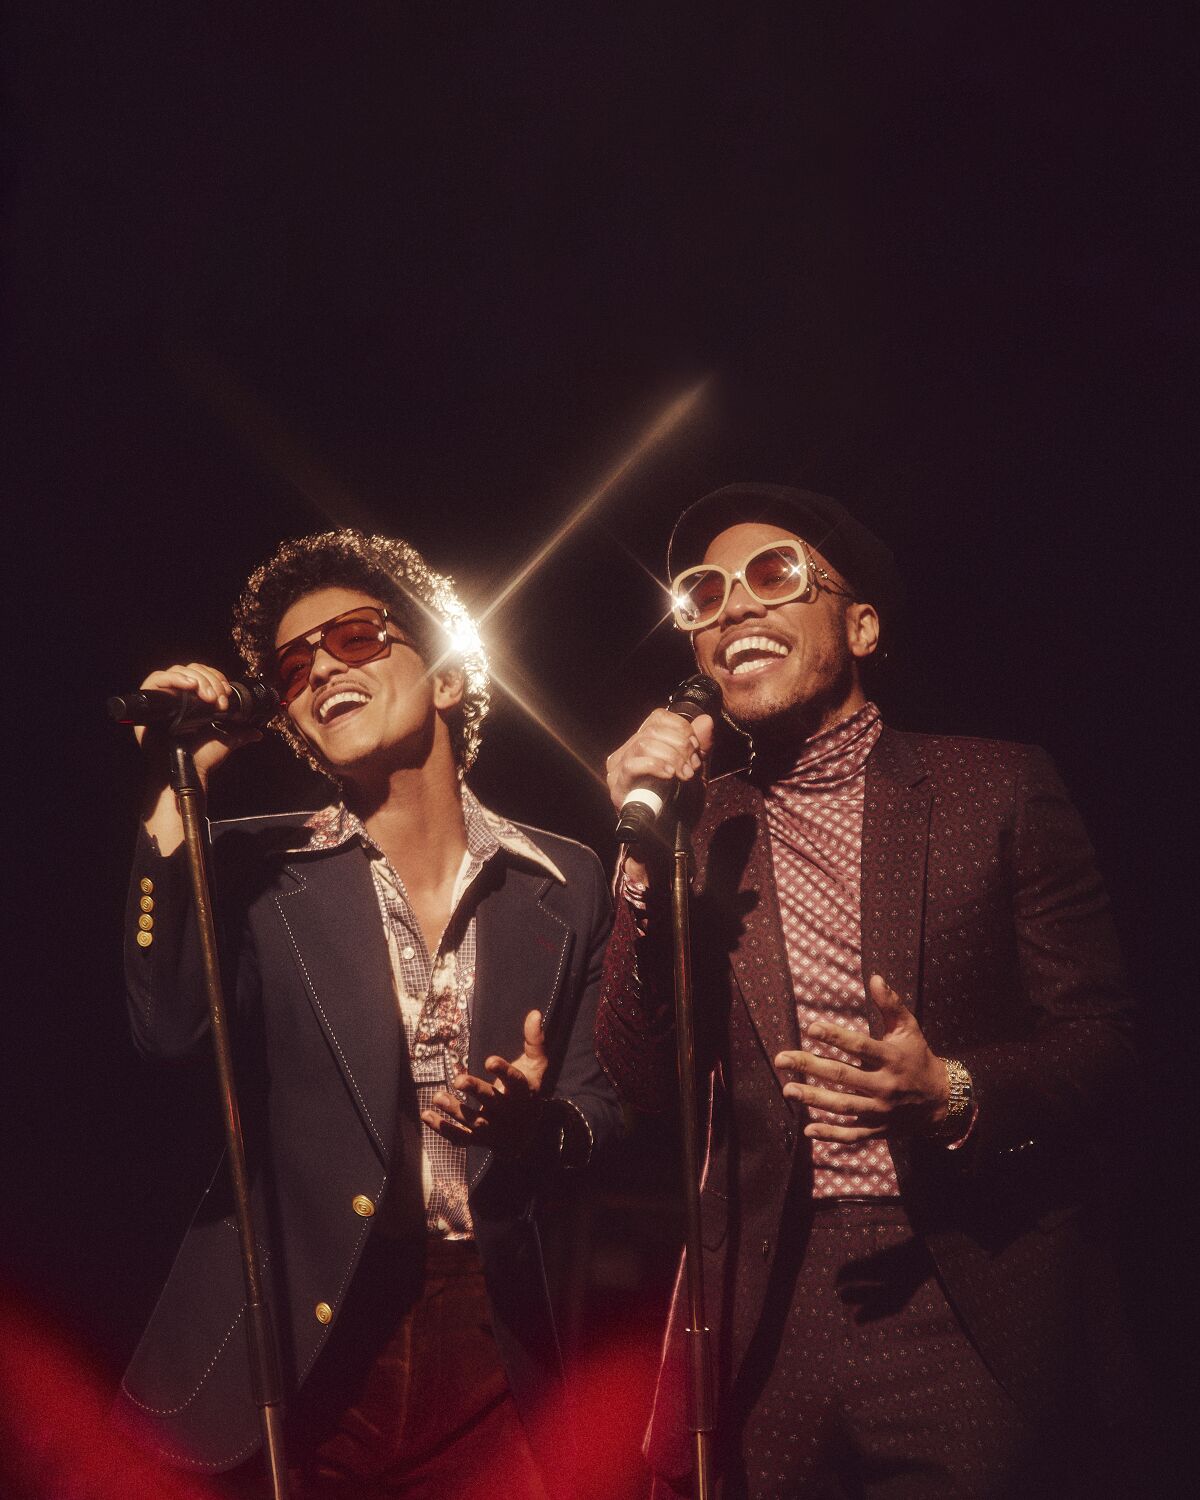 Two men dressed in retro suits singing into microphones